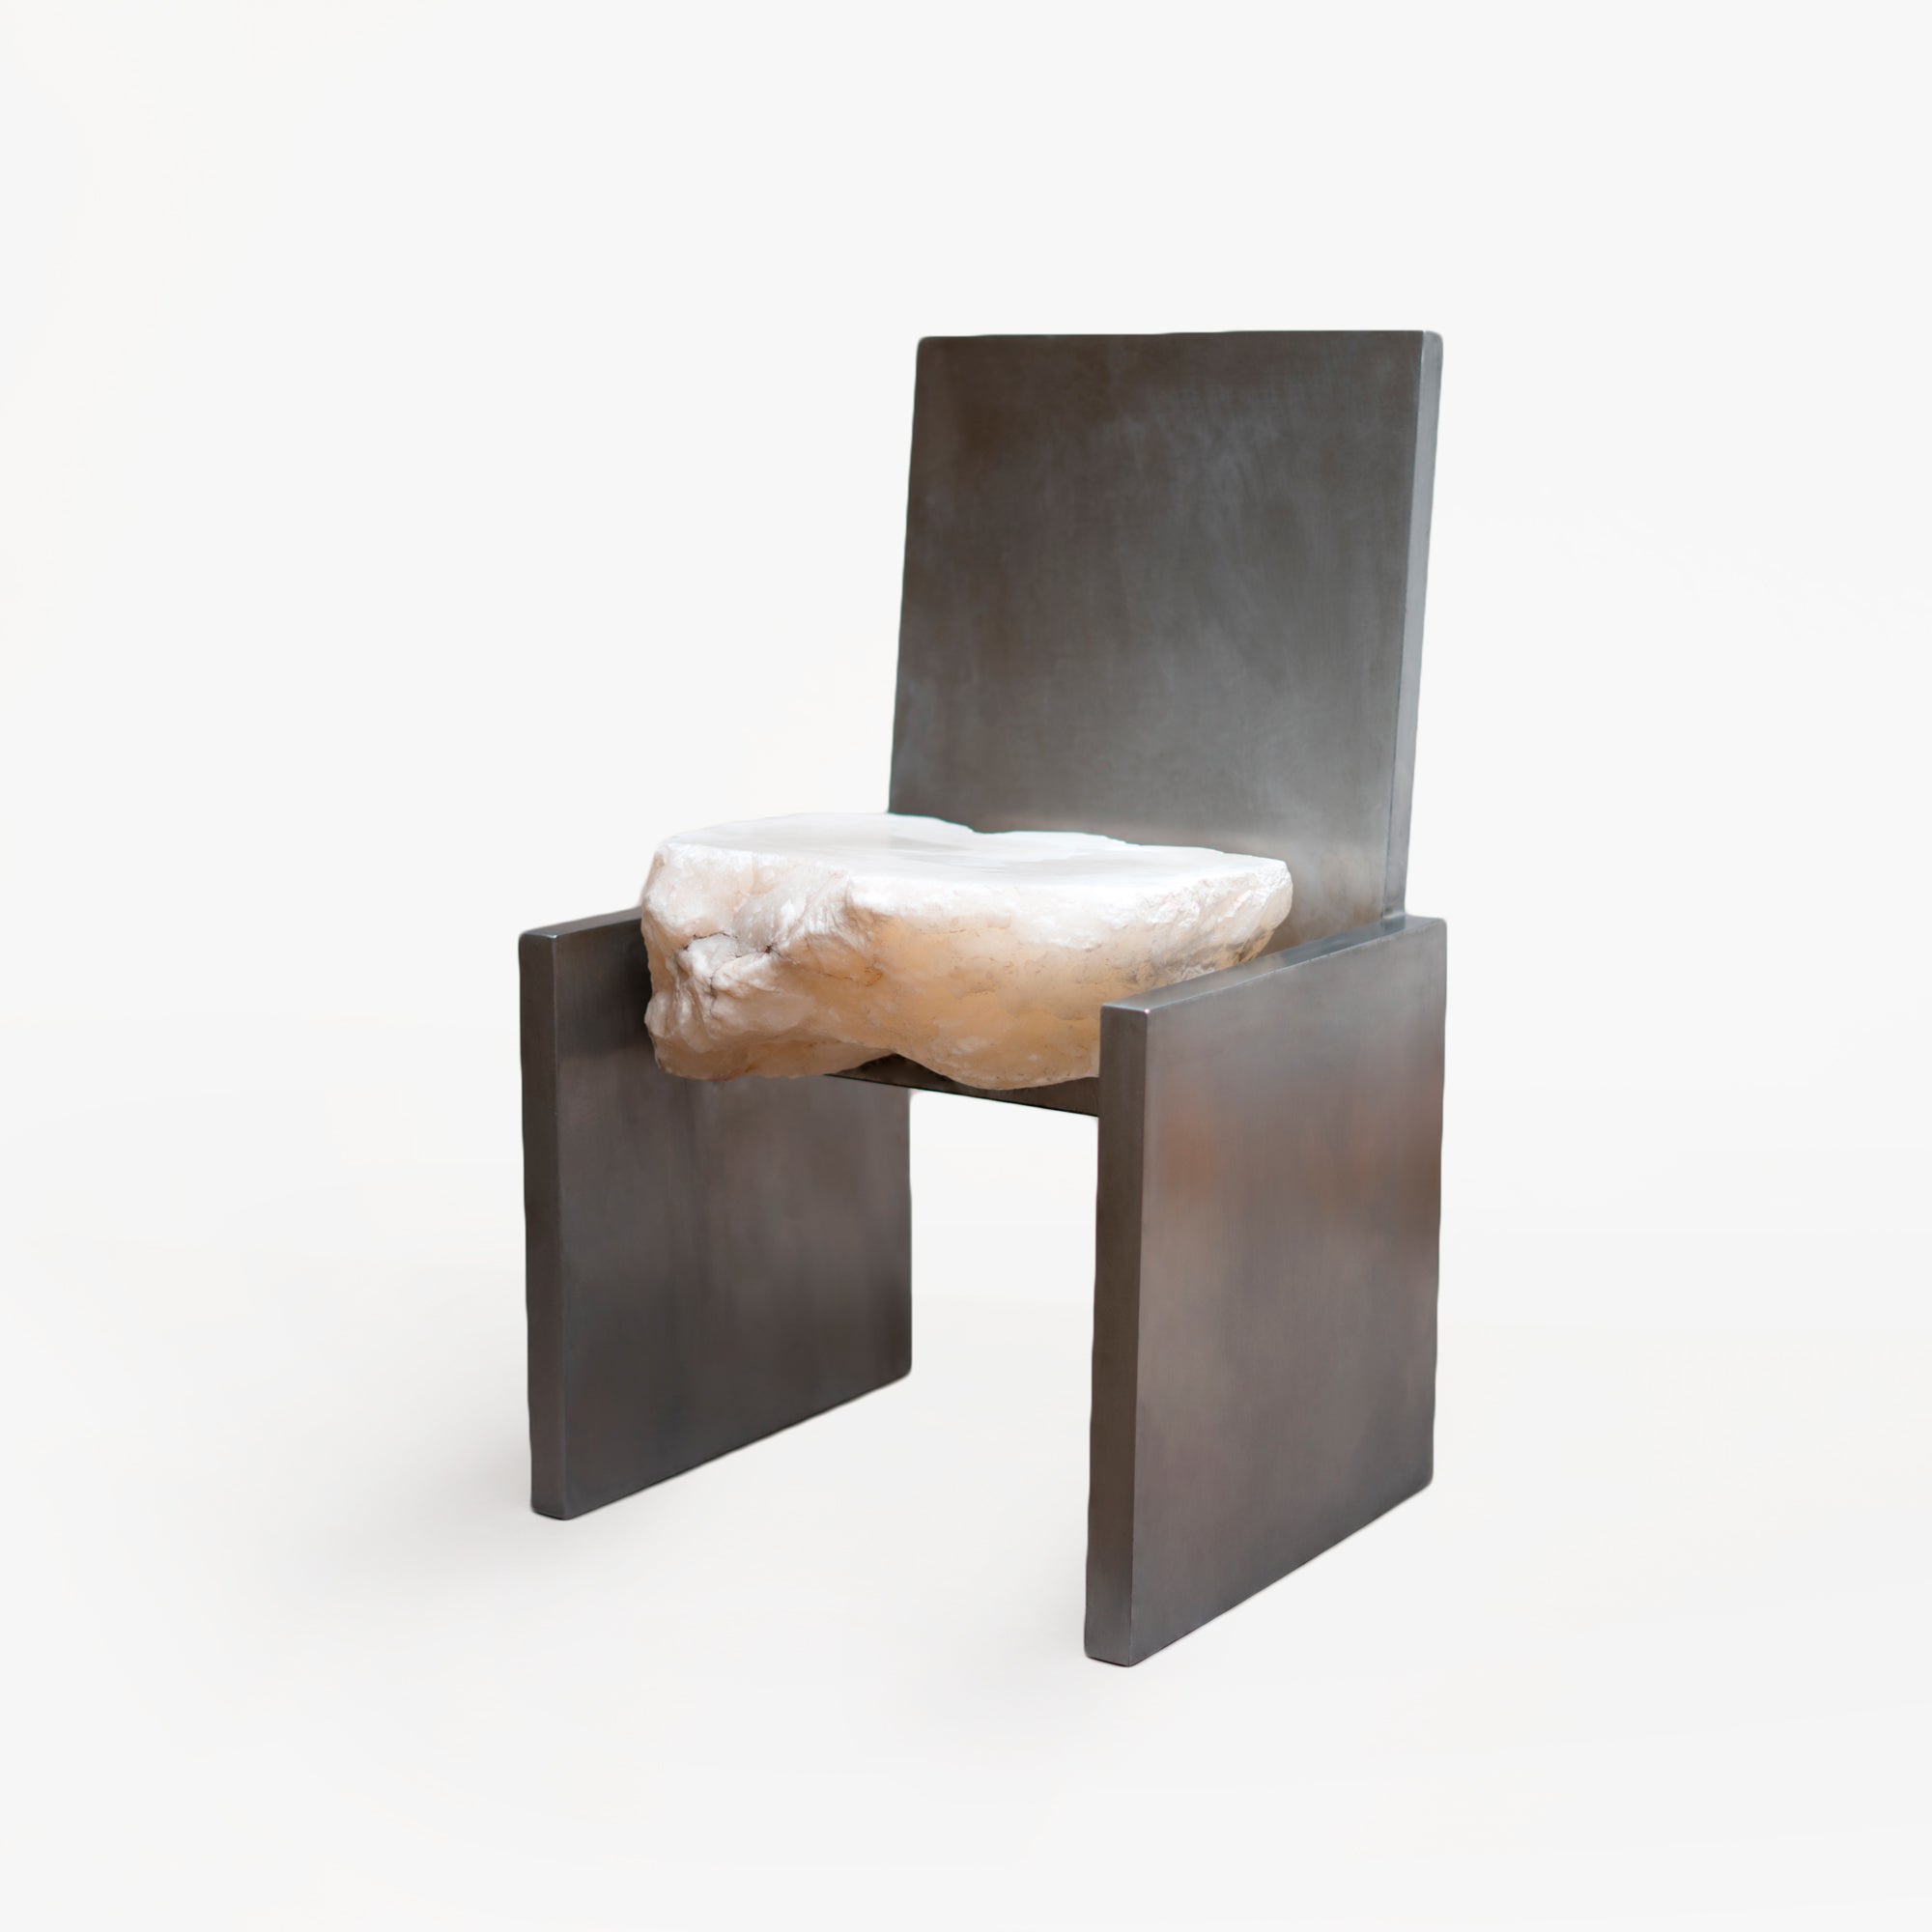 Foreign Bodies – Ceres Chair by Collin Velkoff